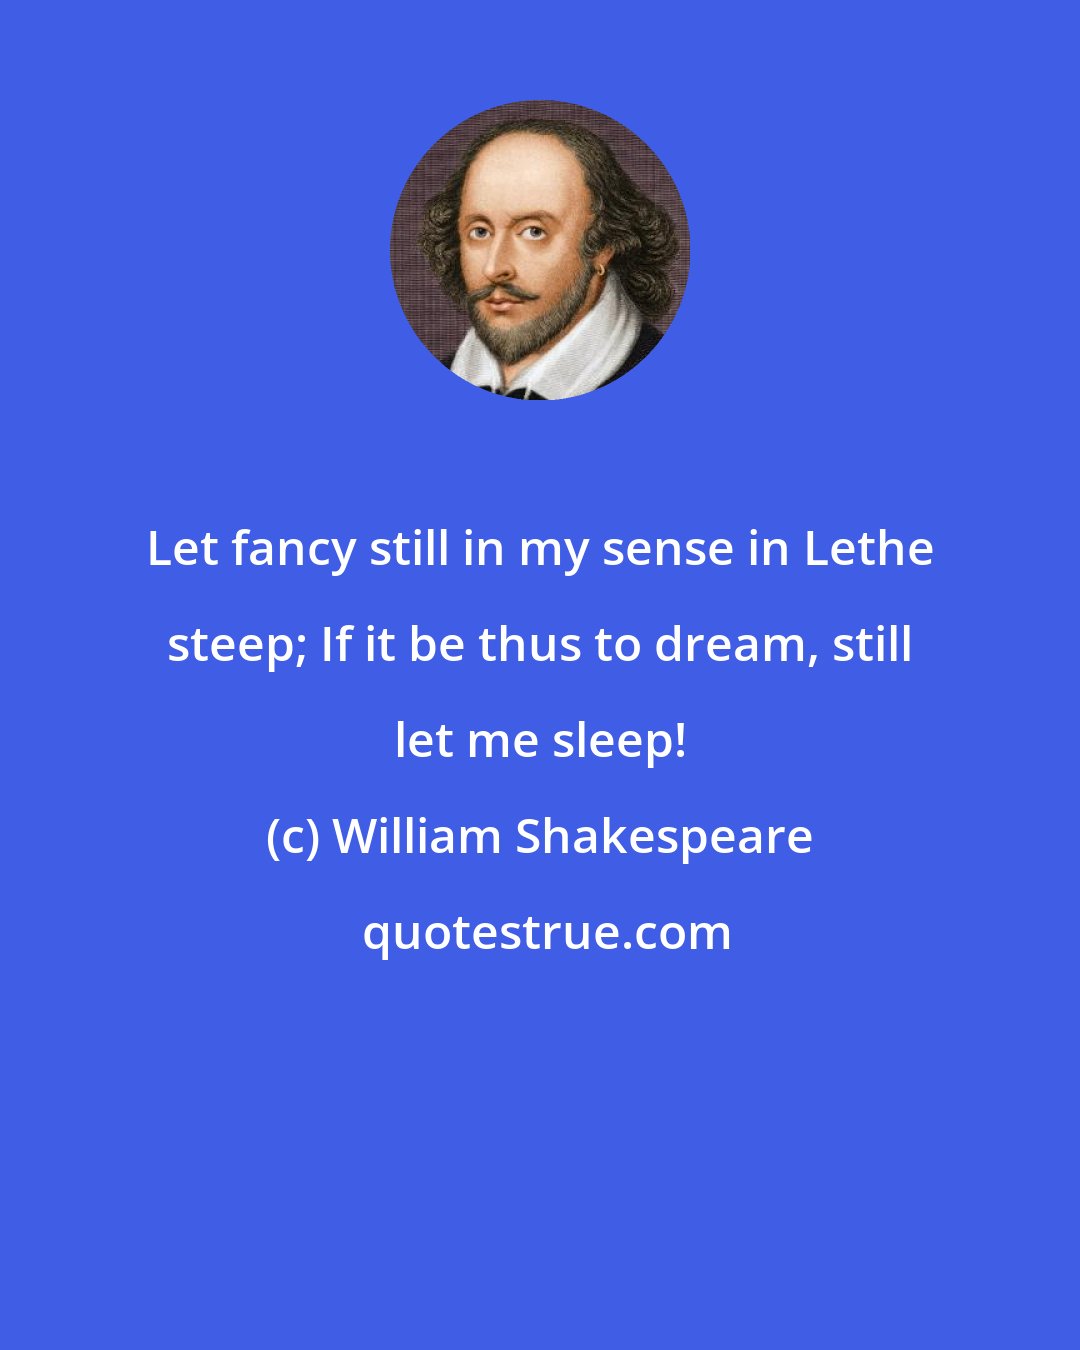 William Shakespeare: Let fancy still in my sense in Lethe steep; If it be thus to dream, still let me sleep!